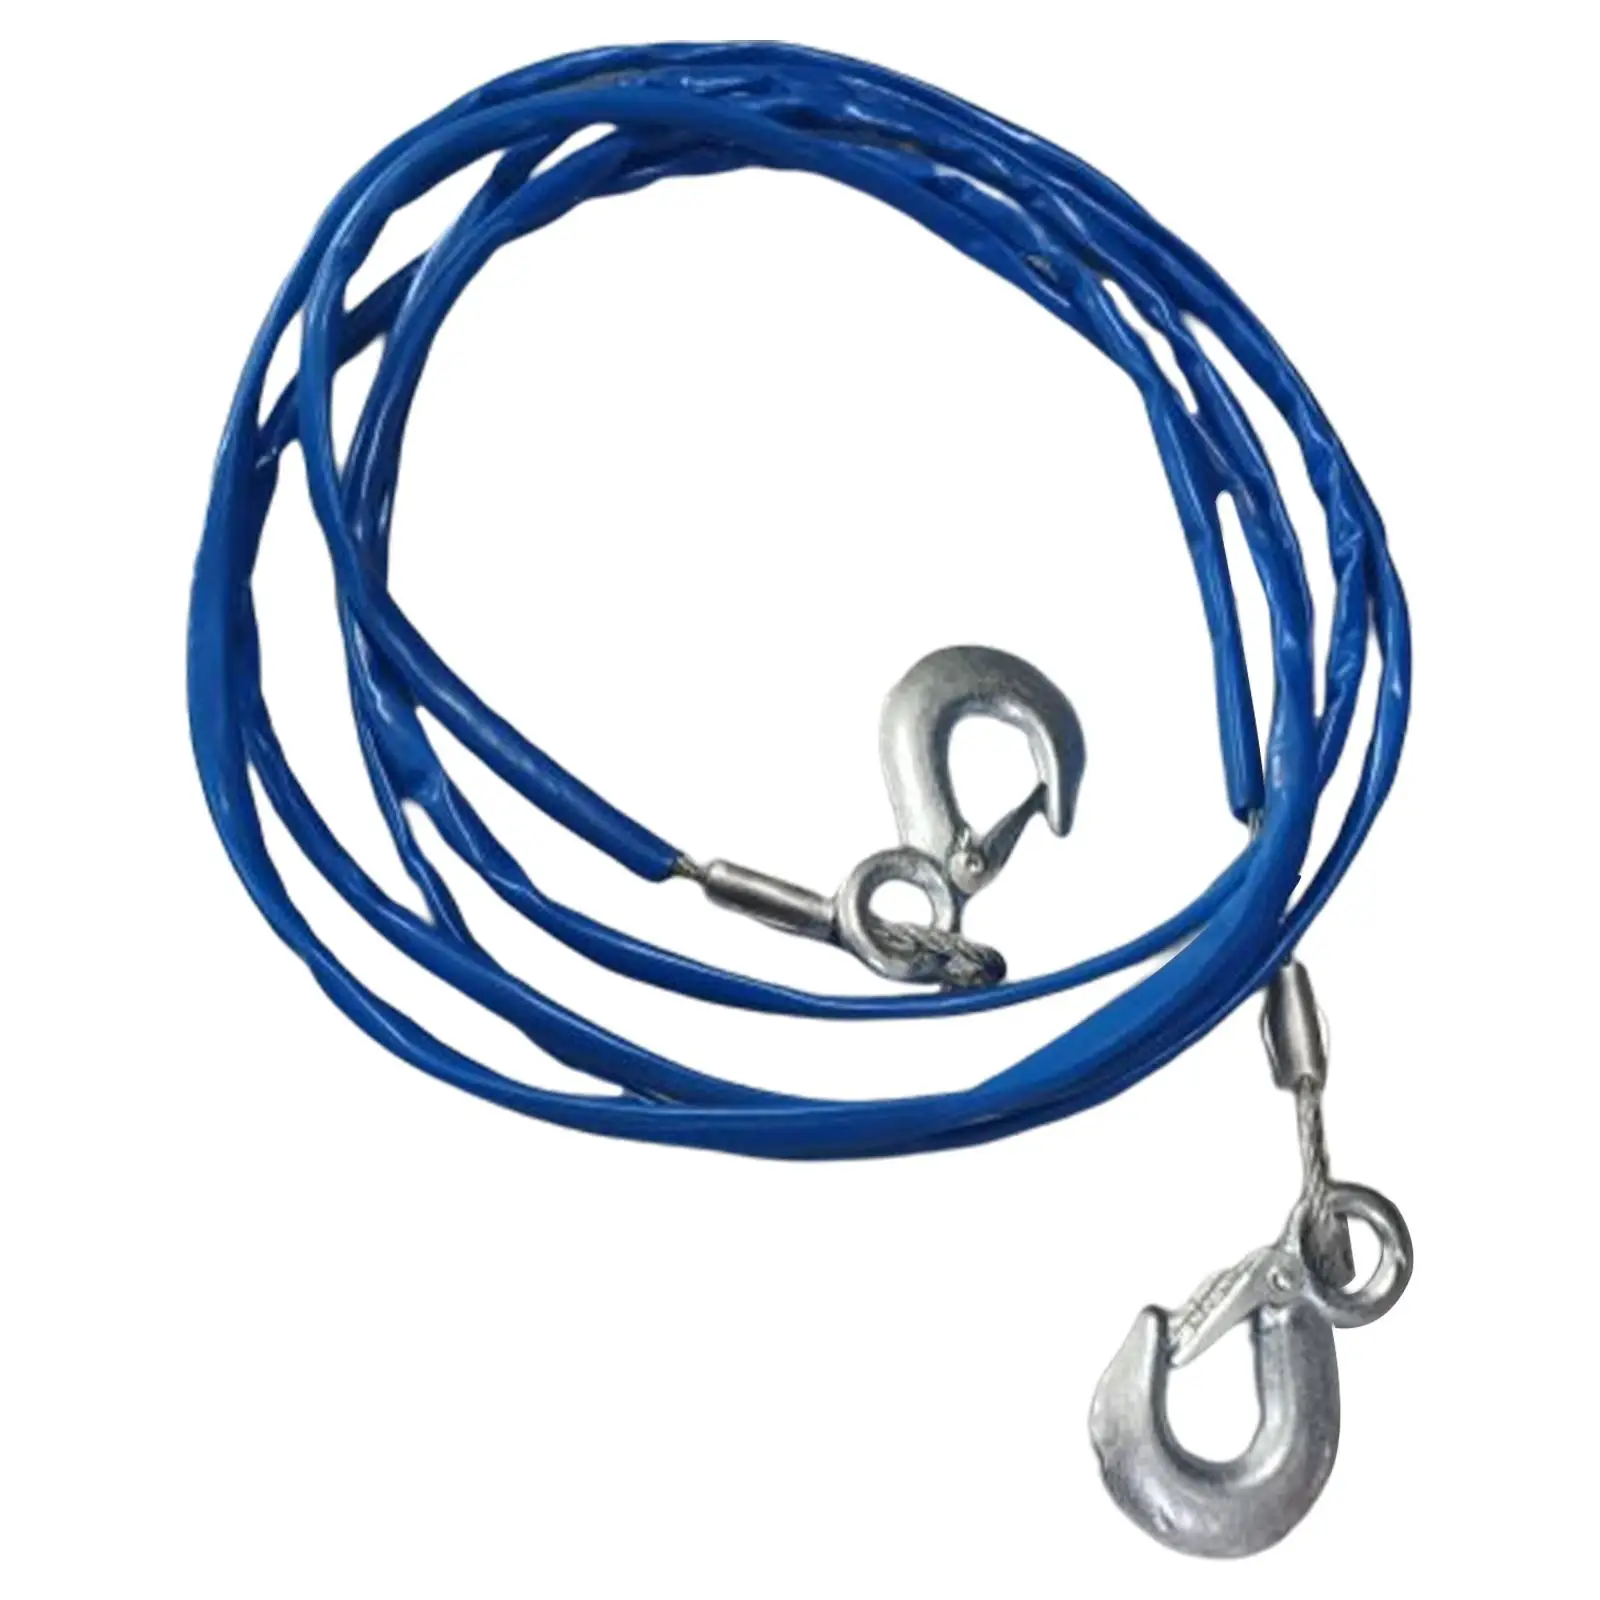 Blue Rubber Coated Tow Recovery Hook Rope 5 Ton 4Meter Heavy Duty Steel Wire Cable for Car